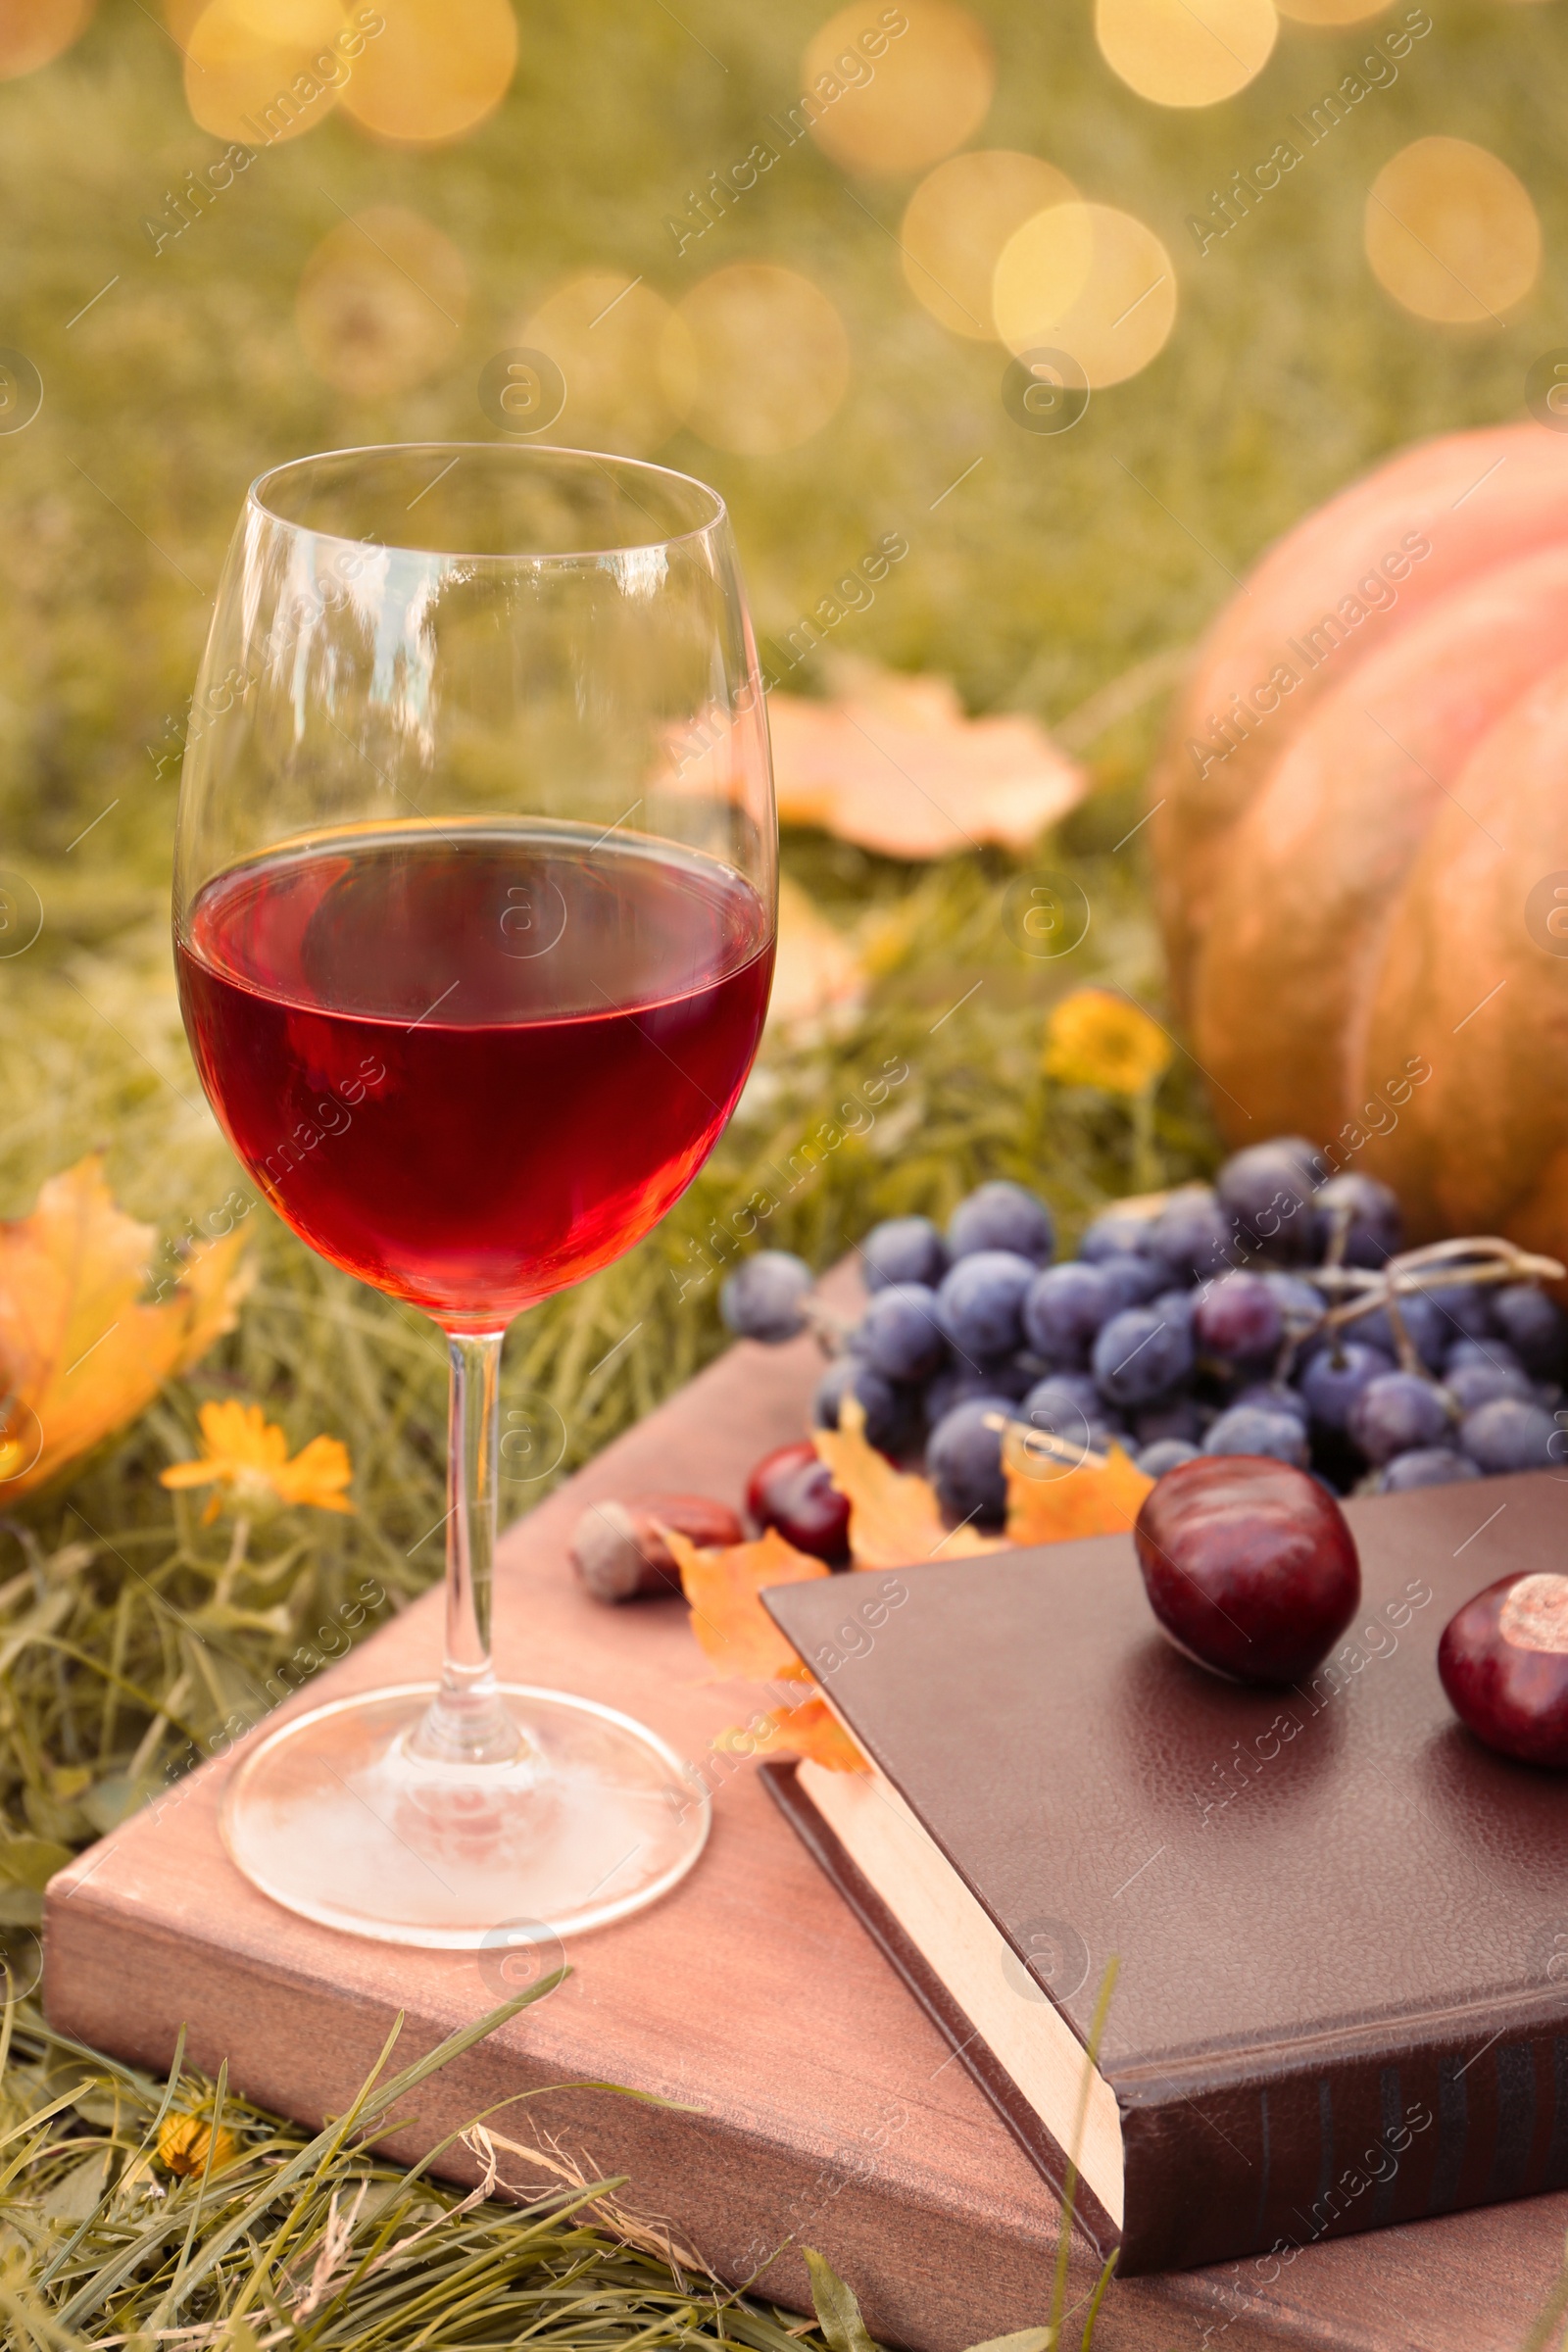 Photo of Glass of wine, book and chestnuts on wooden board outdoors. Autumn picnic